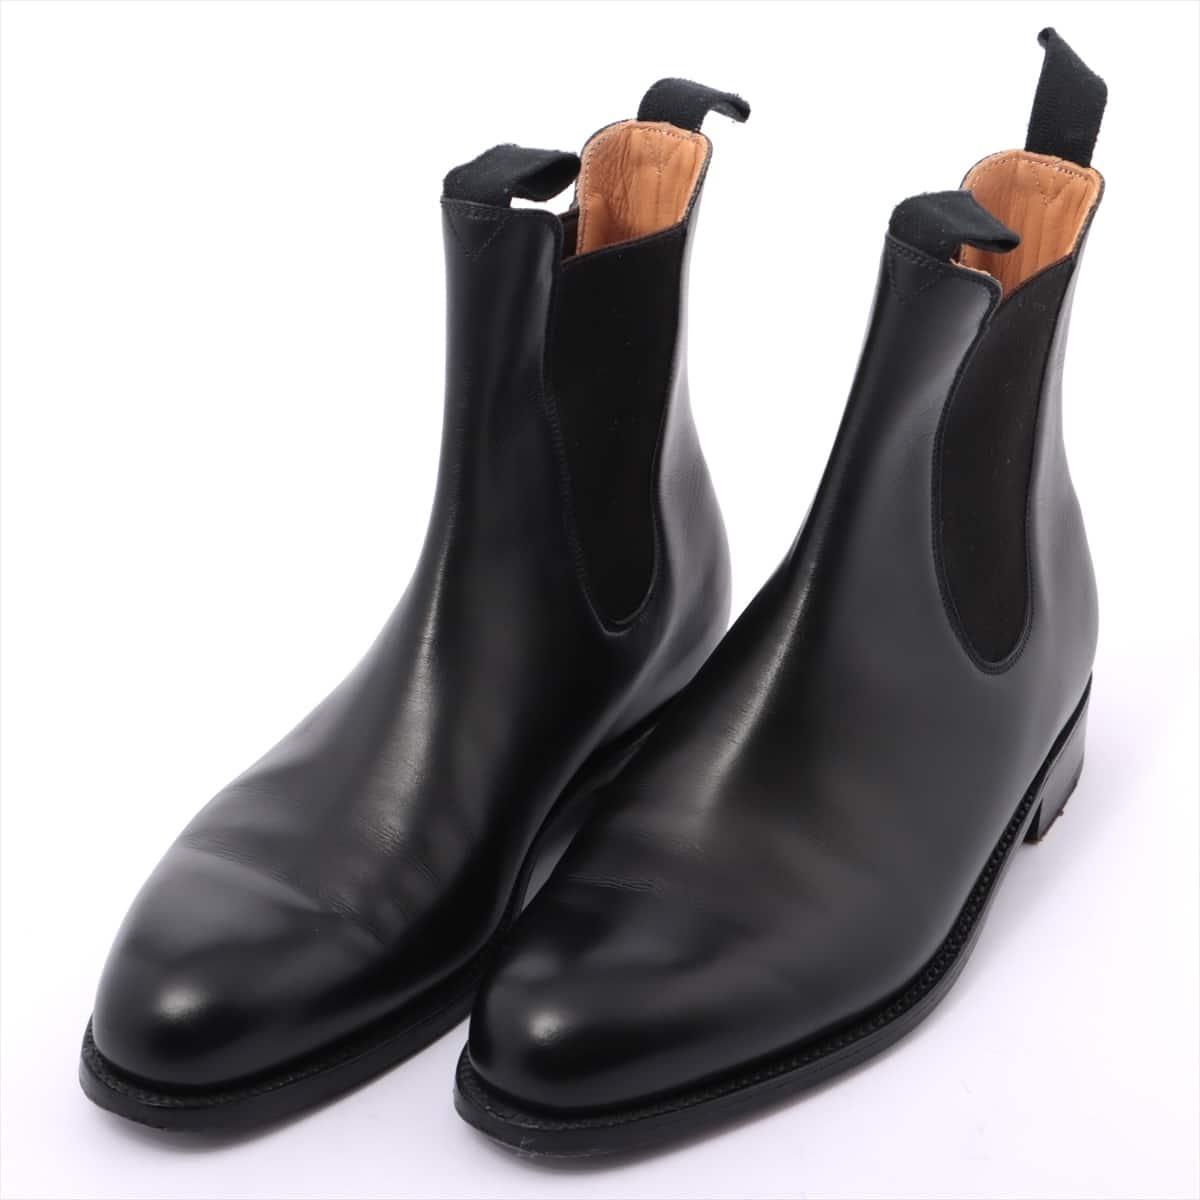 J. M. Weston Leather Side Gore Boots 6 Men's Black 705 Comes with a genuine shoe tree